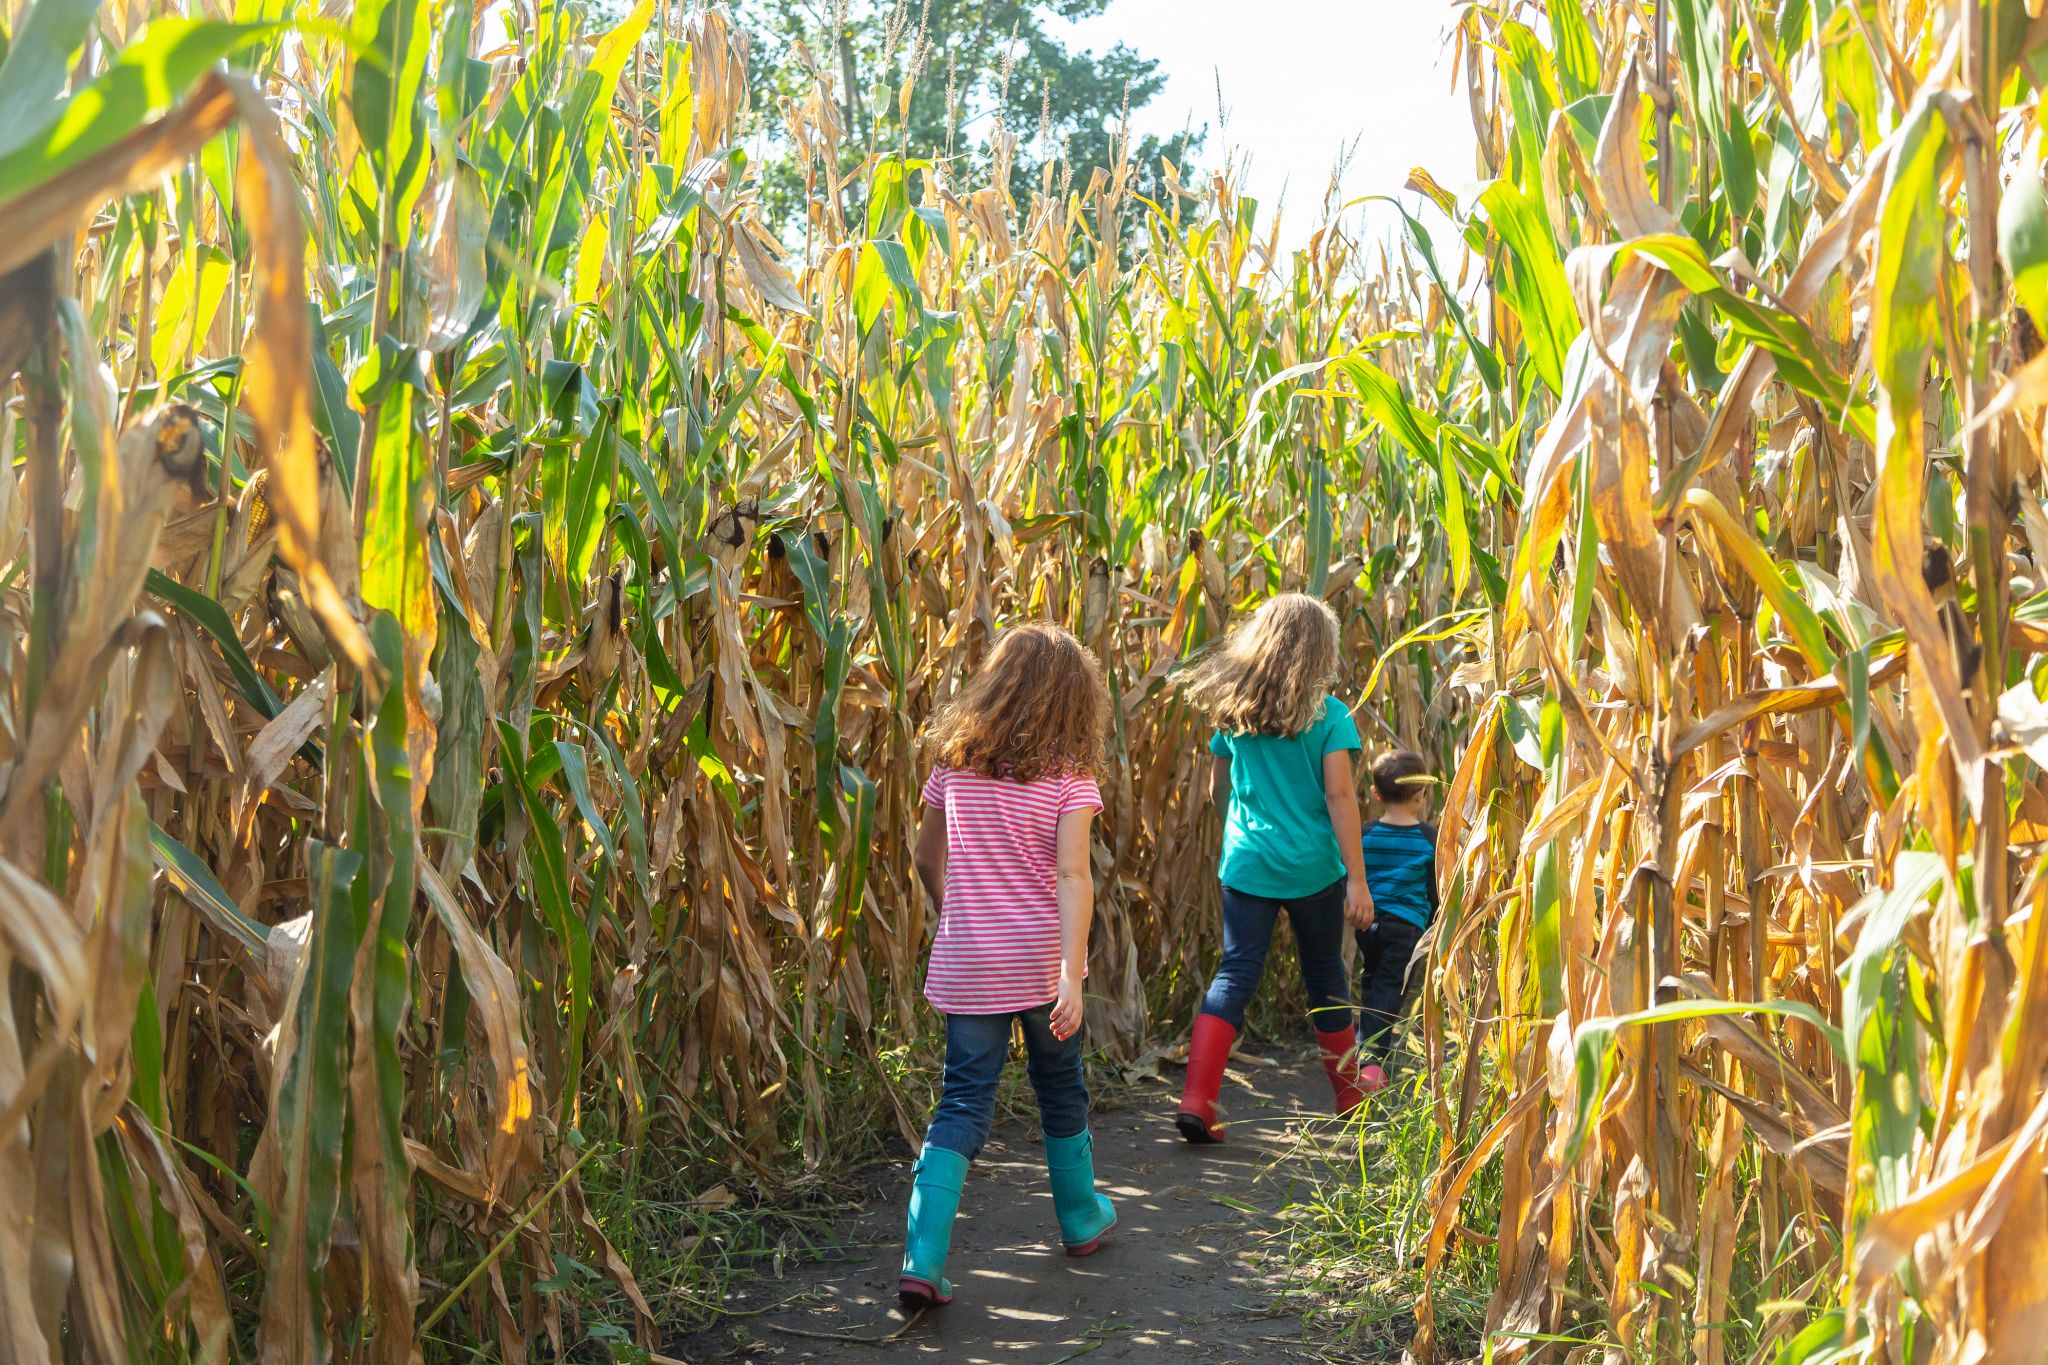 Why Seattle's corn mazes might be one of the safest fall activities